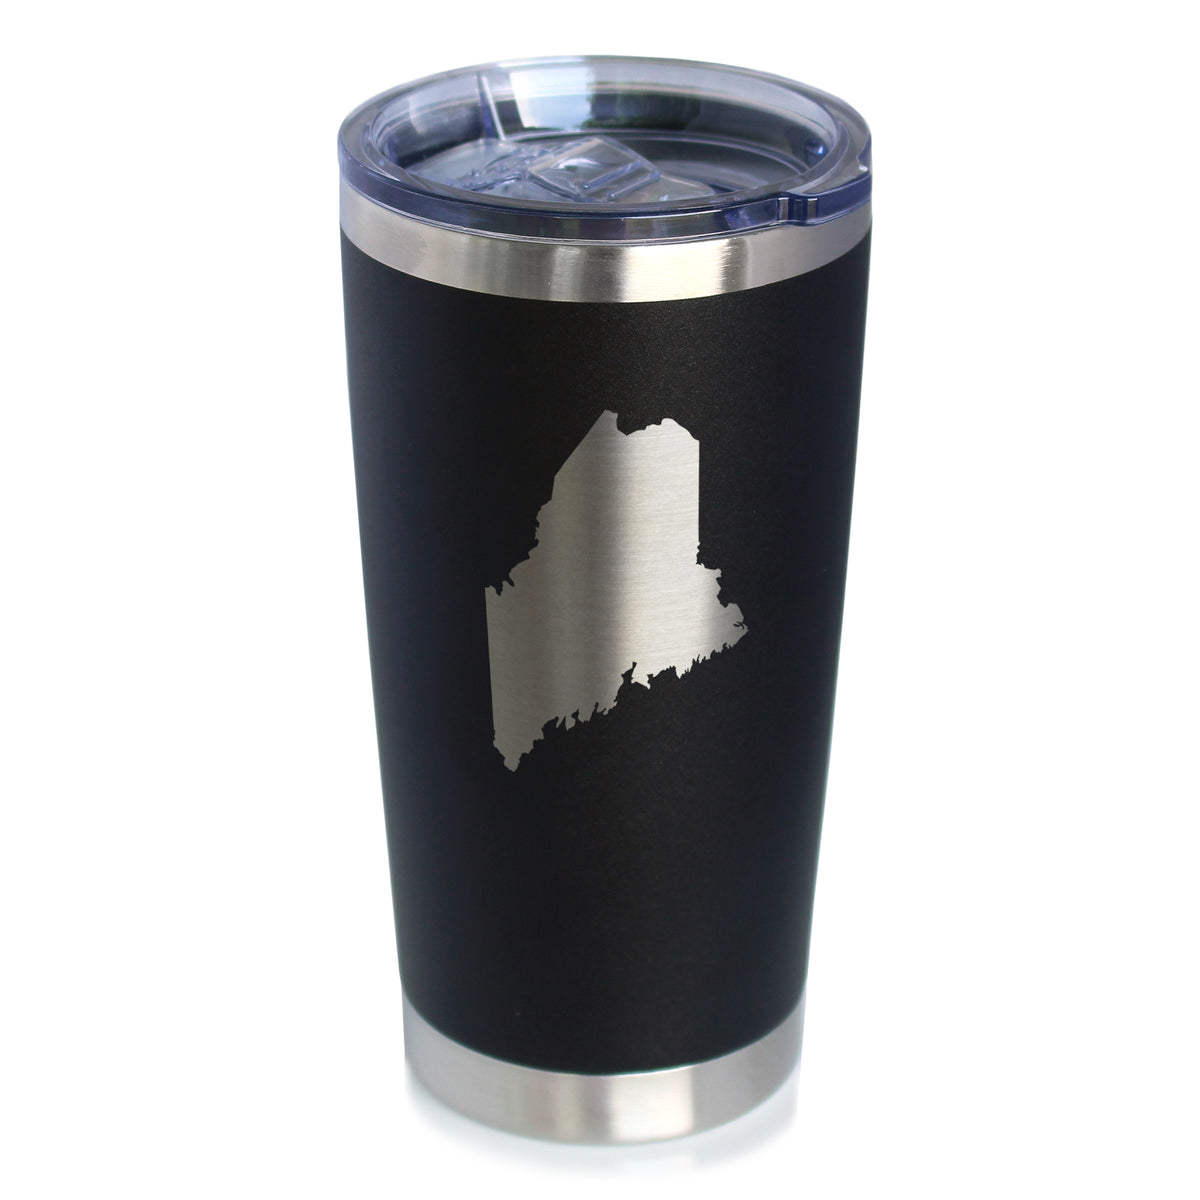 Maine State Outline - Insulated Coffee Tumbler Cup with Sliding Lid - Stainless Steel Travel Mug - Maine Gifts for Women and Men Mainers